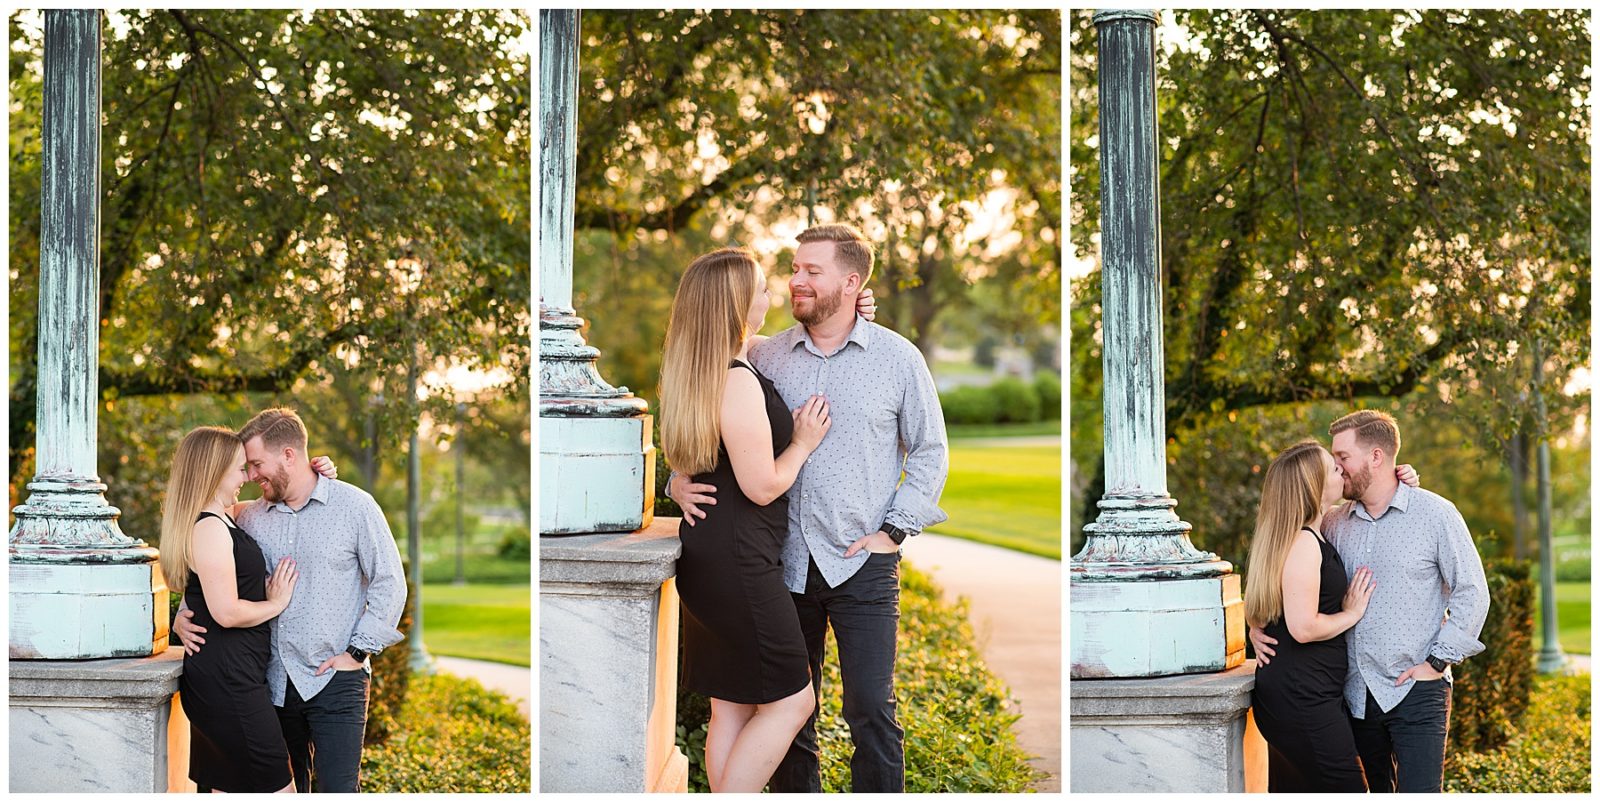 A Cleveland engagement session, wade lagoon photos, summer photos, sweet and candid photos, romantic engagement photos, outfit ideas, marble steps, big columns at art museum for photos golden hour, glowy light